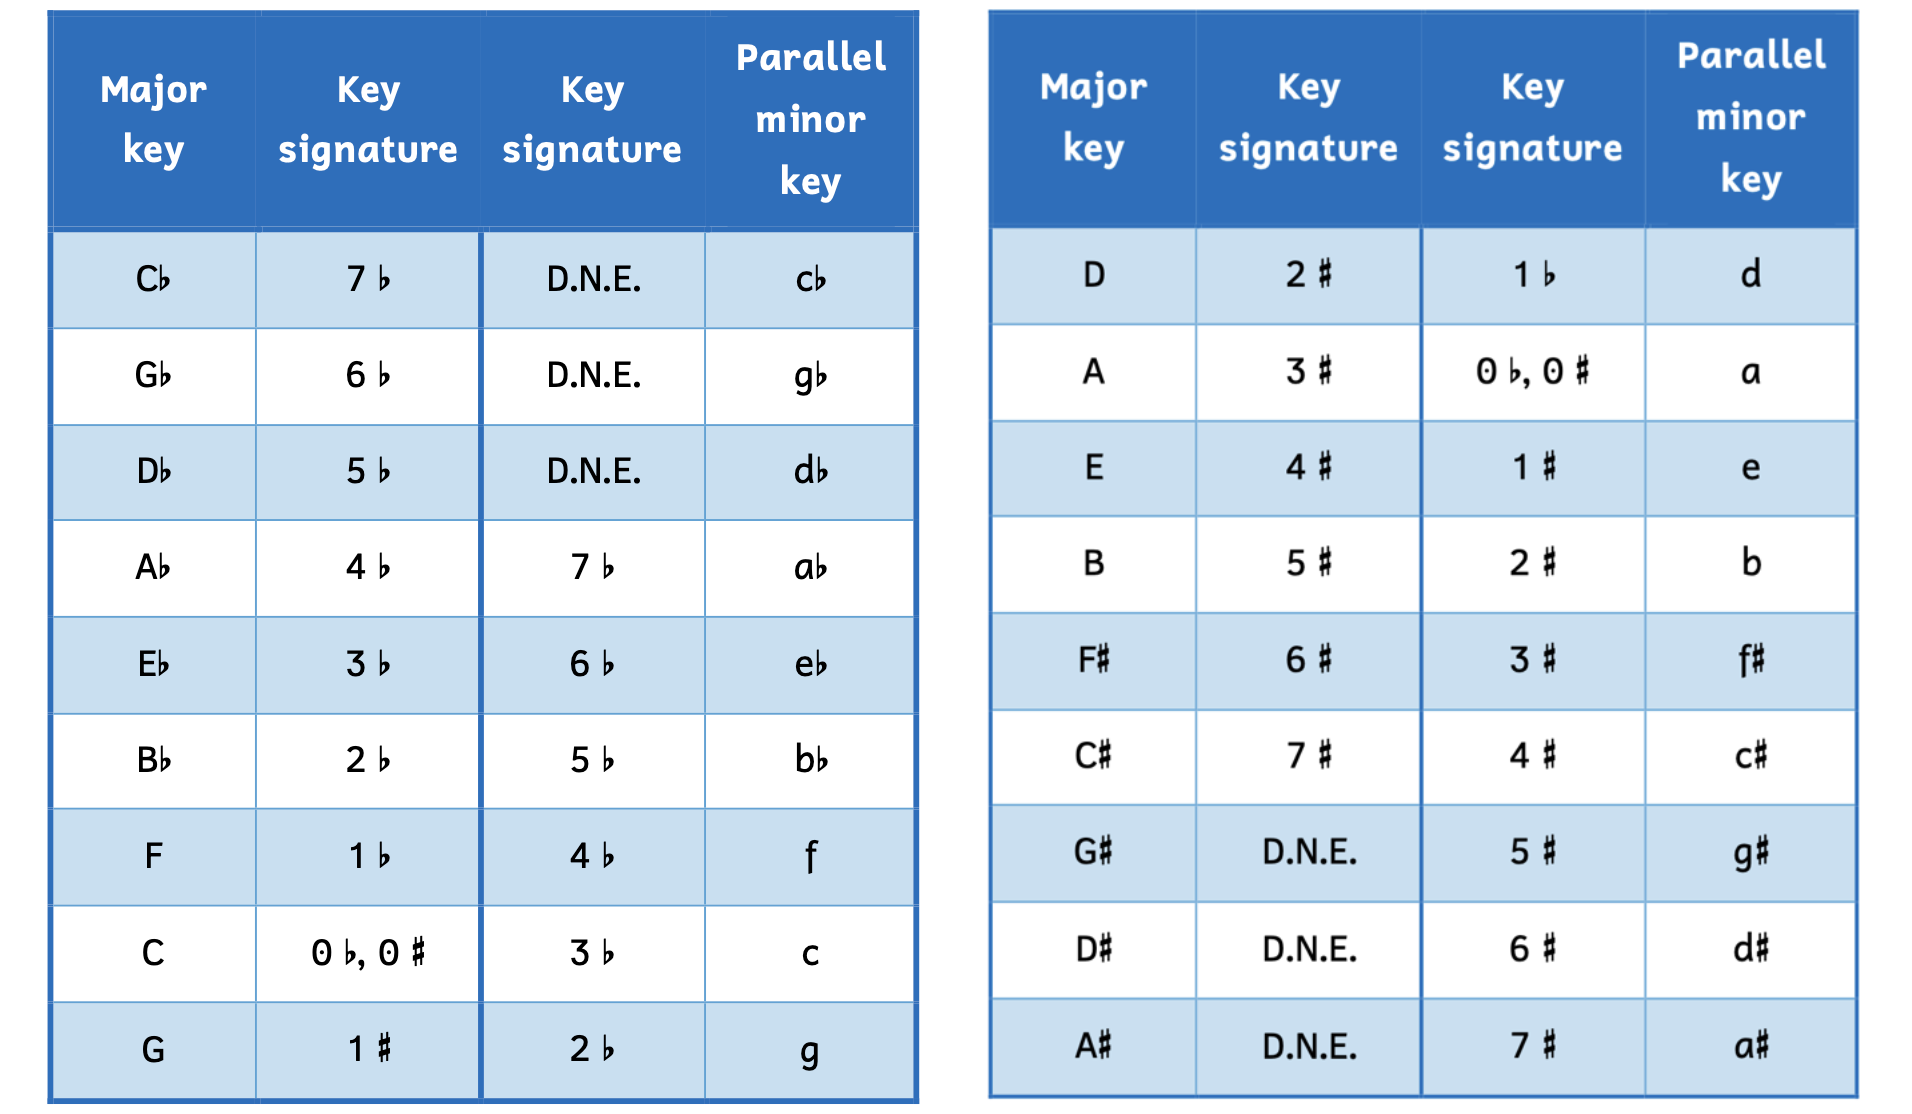 Table showing the key signatures of parallel major and minor keys. Some keys (such as C-flat major) do not have a parallel minor (since there is no such thing as C-flat minor) while other keys (such as A-sharp minor) do not have a parallel major (since there is no such thing as A-sharp major).